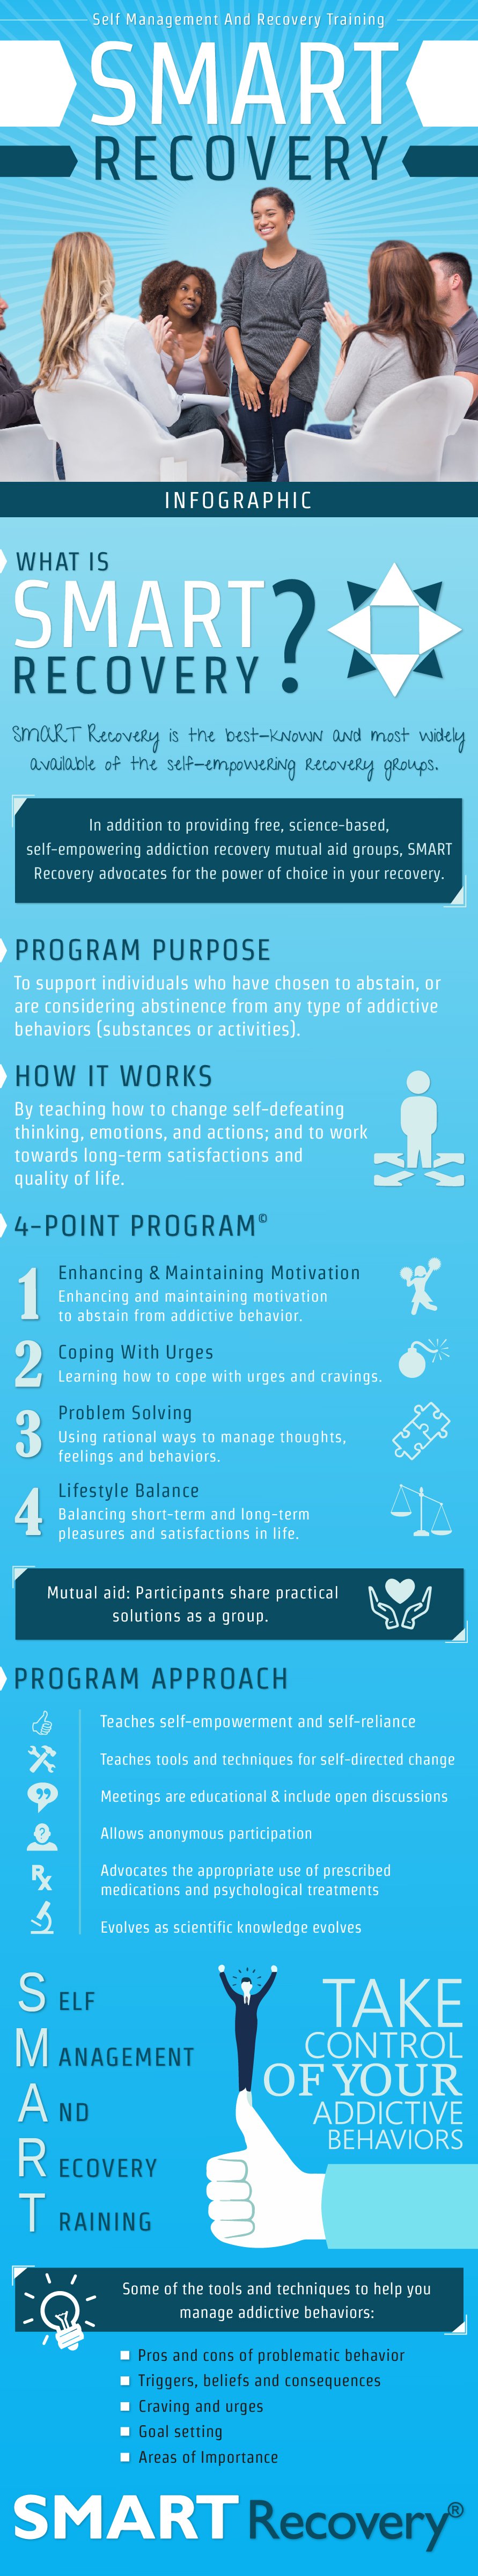 SMART Recovery (Self Management and Recovery Training).